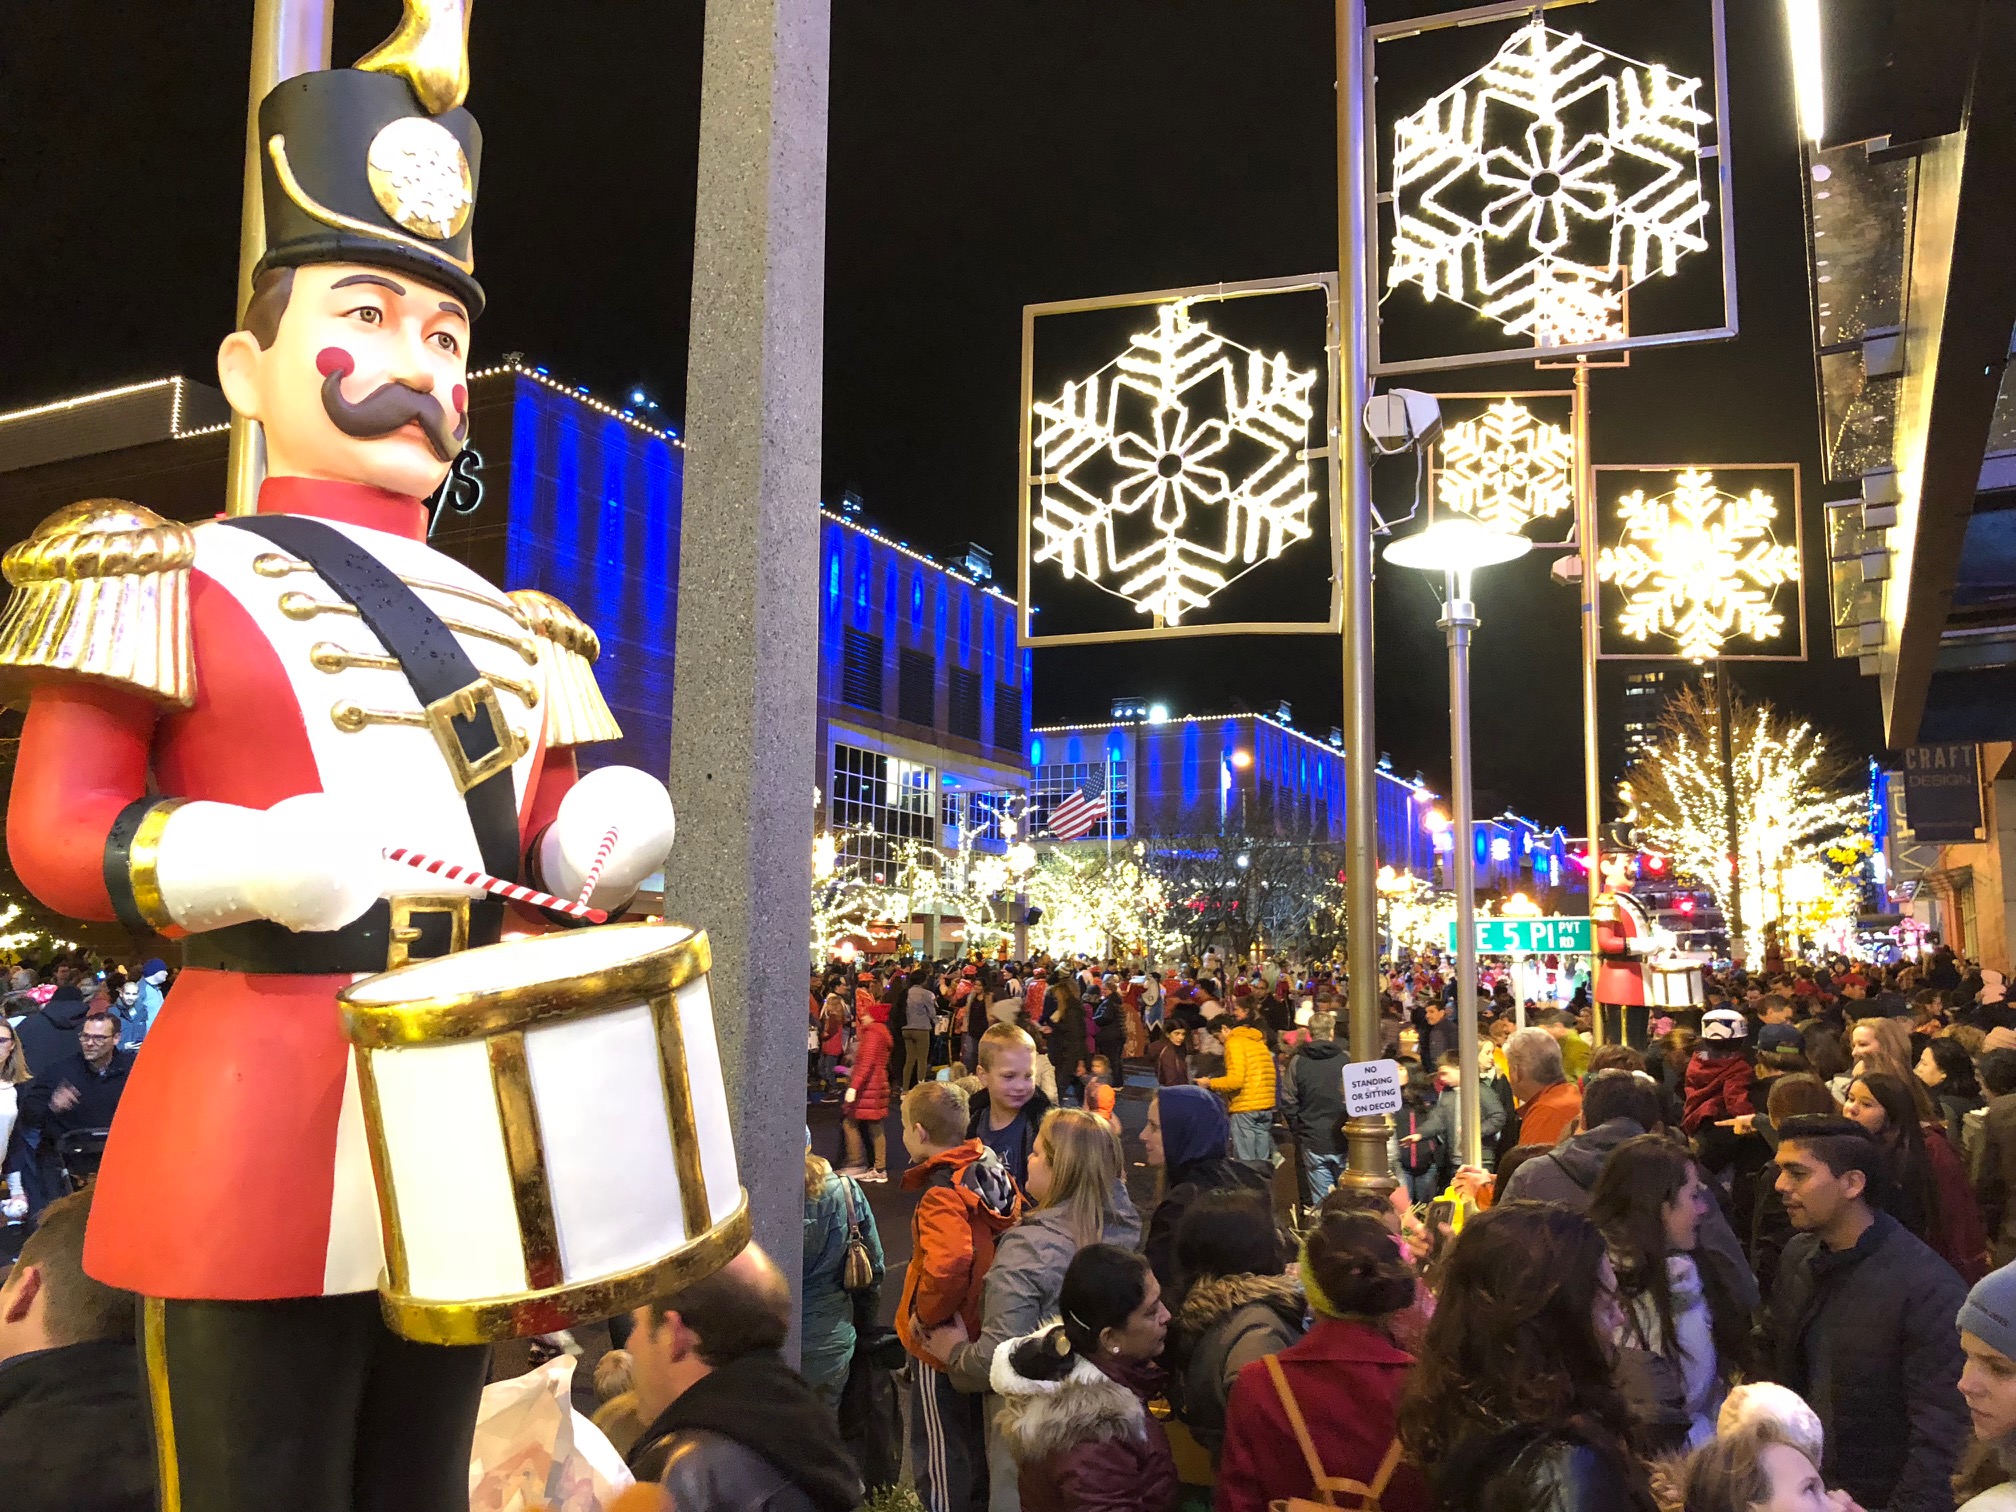 Winter Illumination at The Bravern - Bellevue Events, Happenings,  Attractions